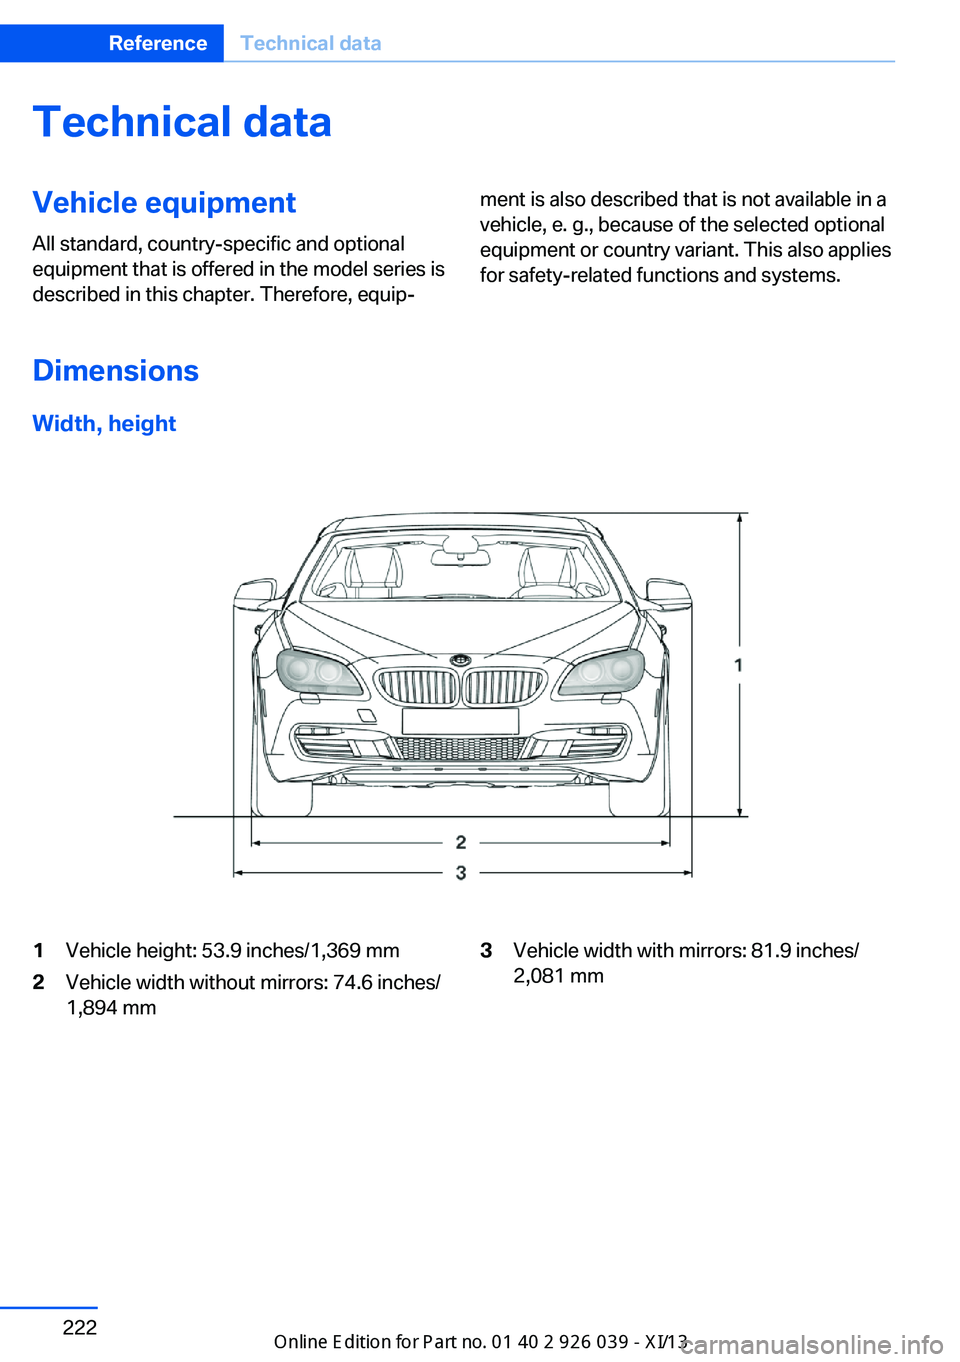 BMW 6 SERIES COUPE 2013 F13 Owners Manual Technical dataVehicle equipment
All standard, country-specific and optional
equipment that is offered in the model series is
described in this chapter. Therefore, equip‐ment is also described that i